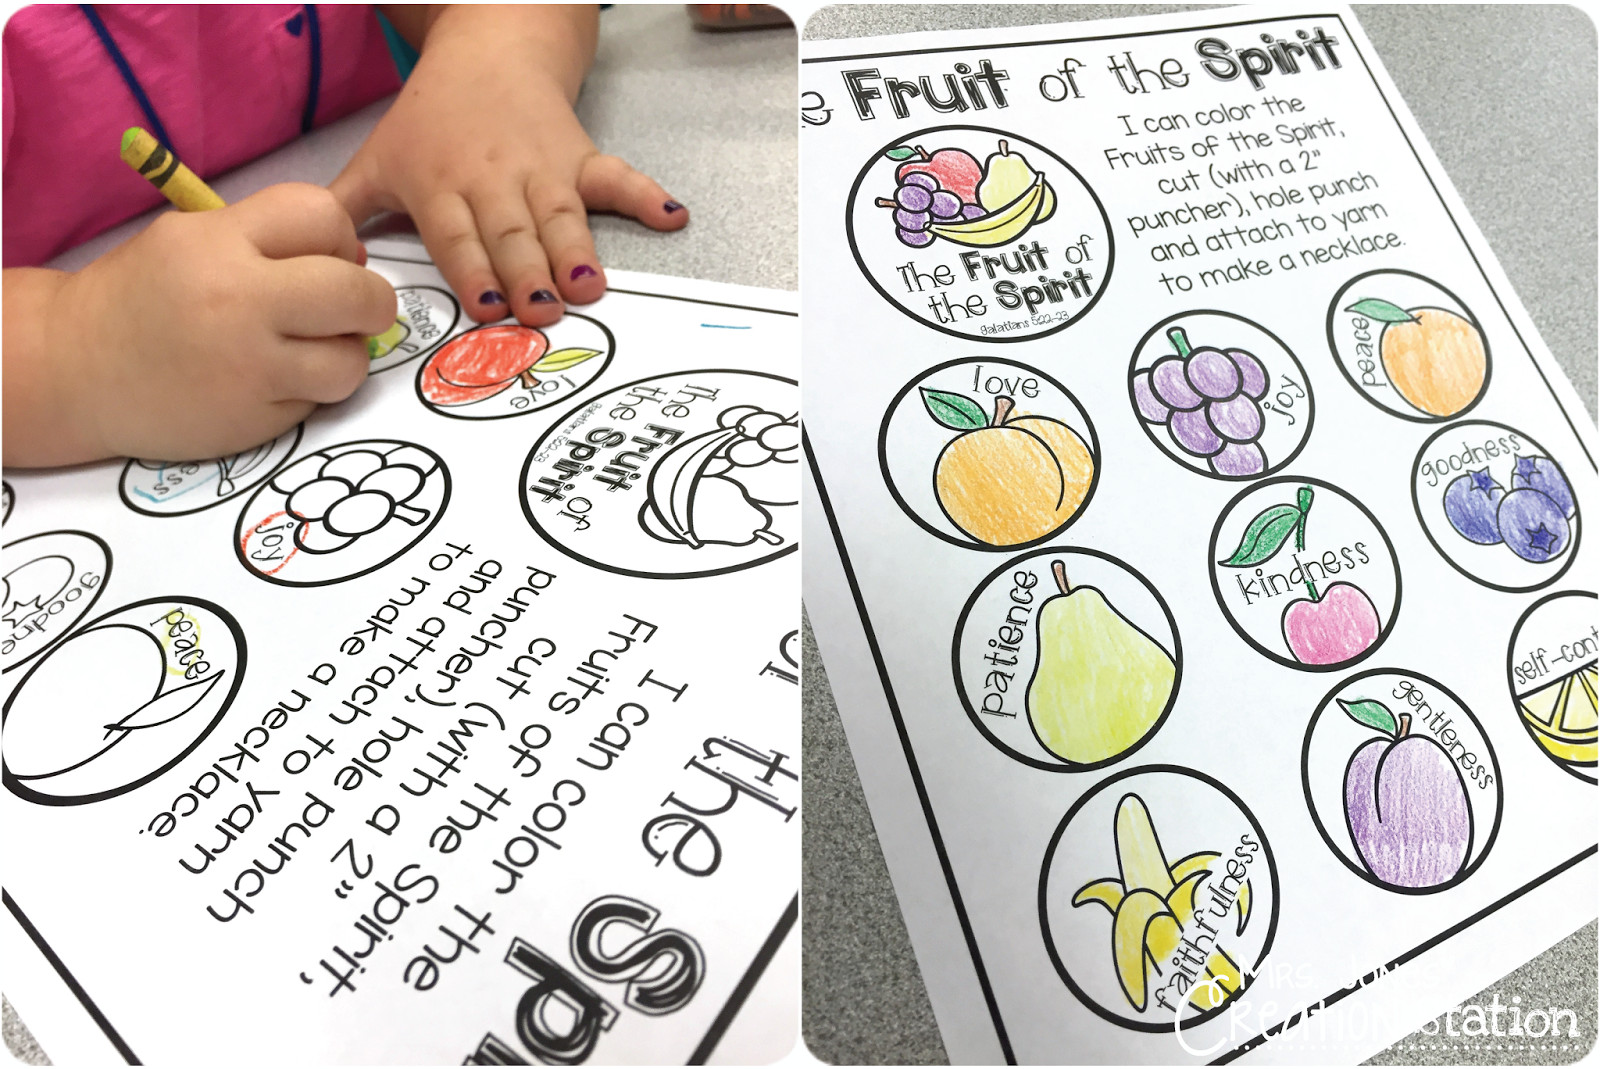 Fruit Of The Spirit Crafts For Preschoolers
 The Fruit of the Spirit Necklace Mrs Jones Creation Station